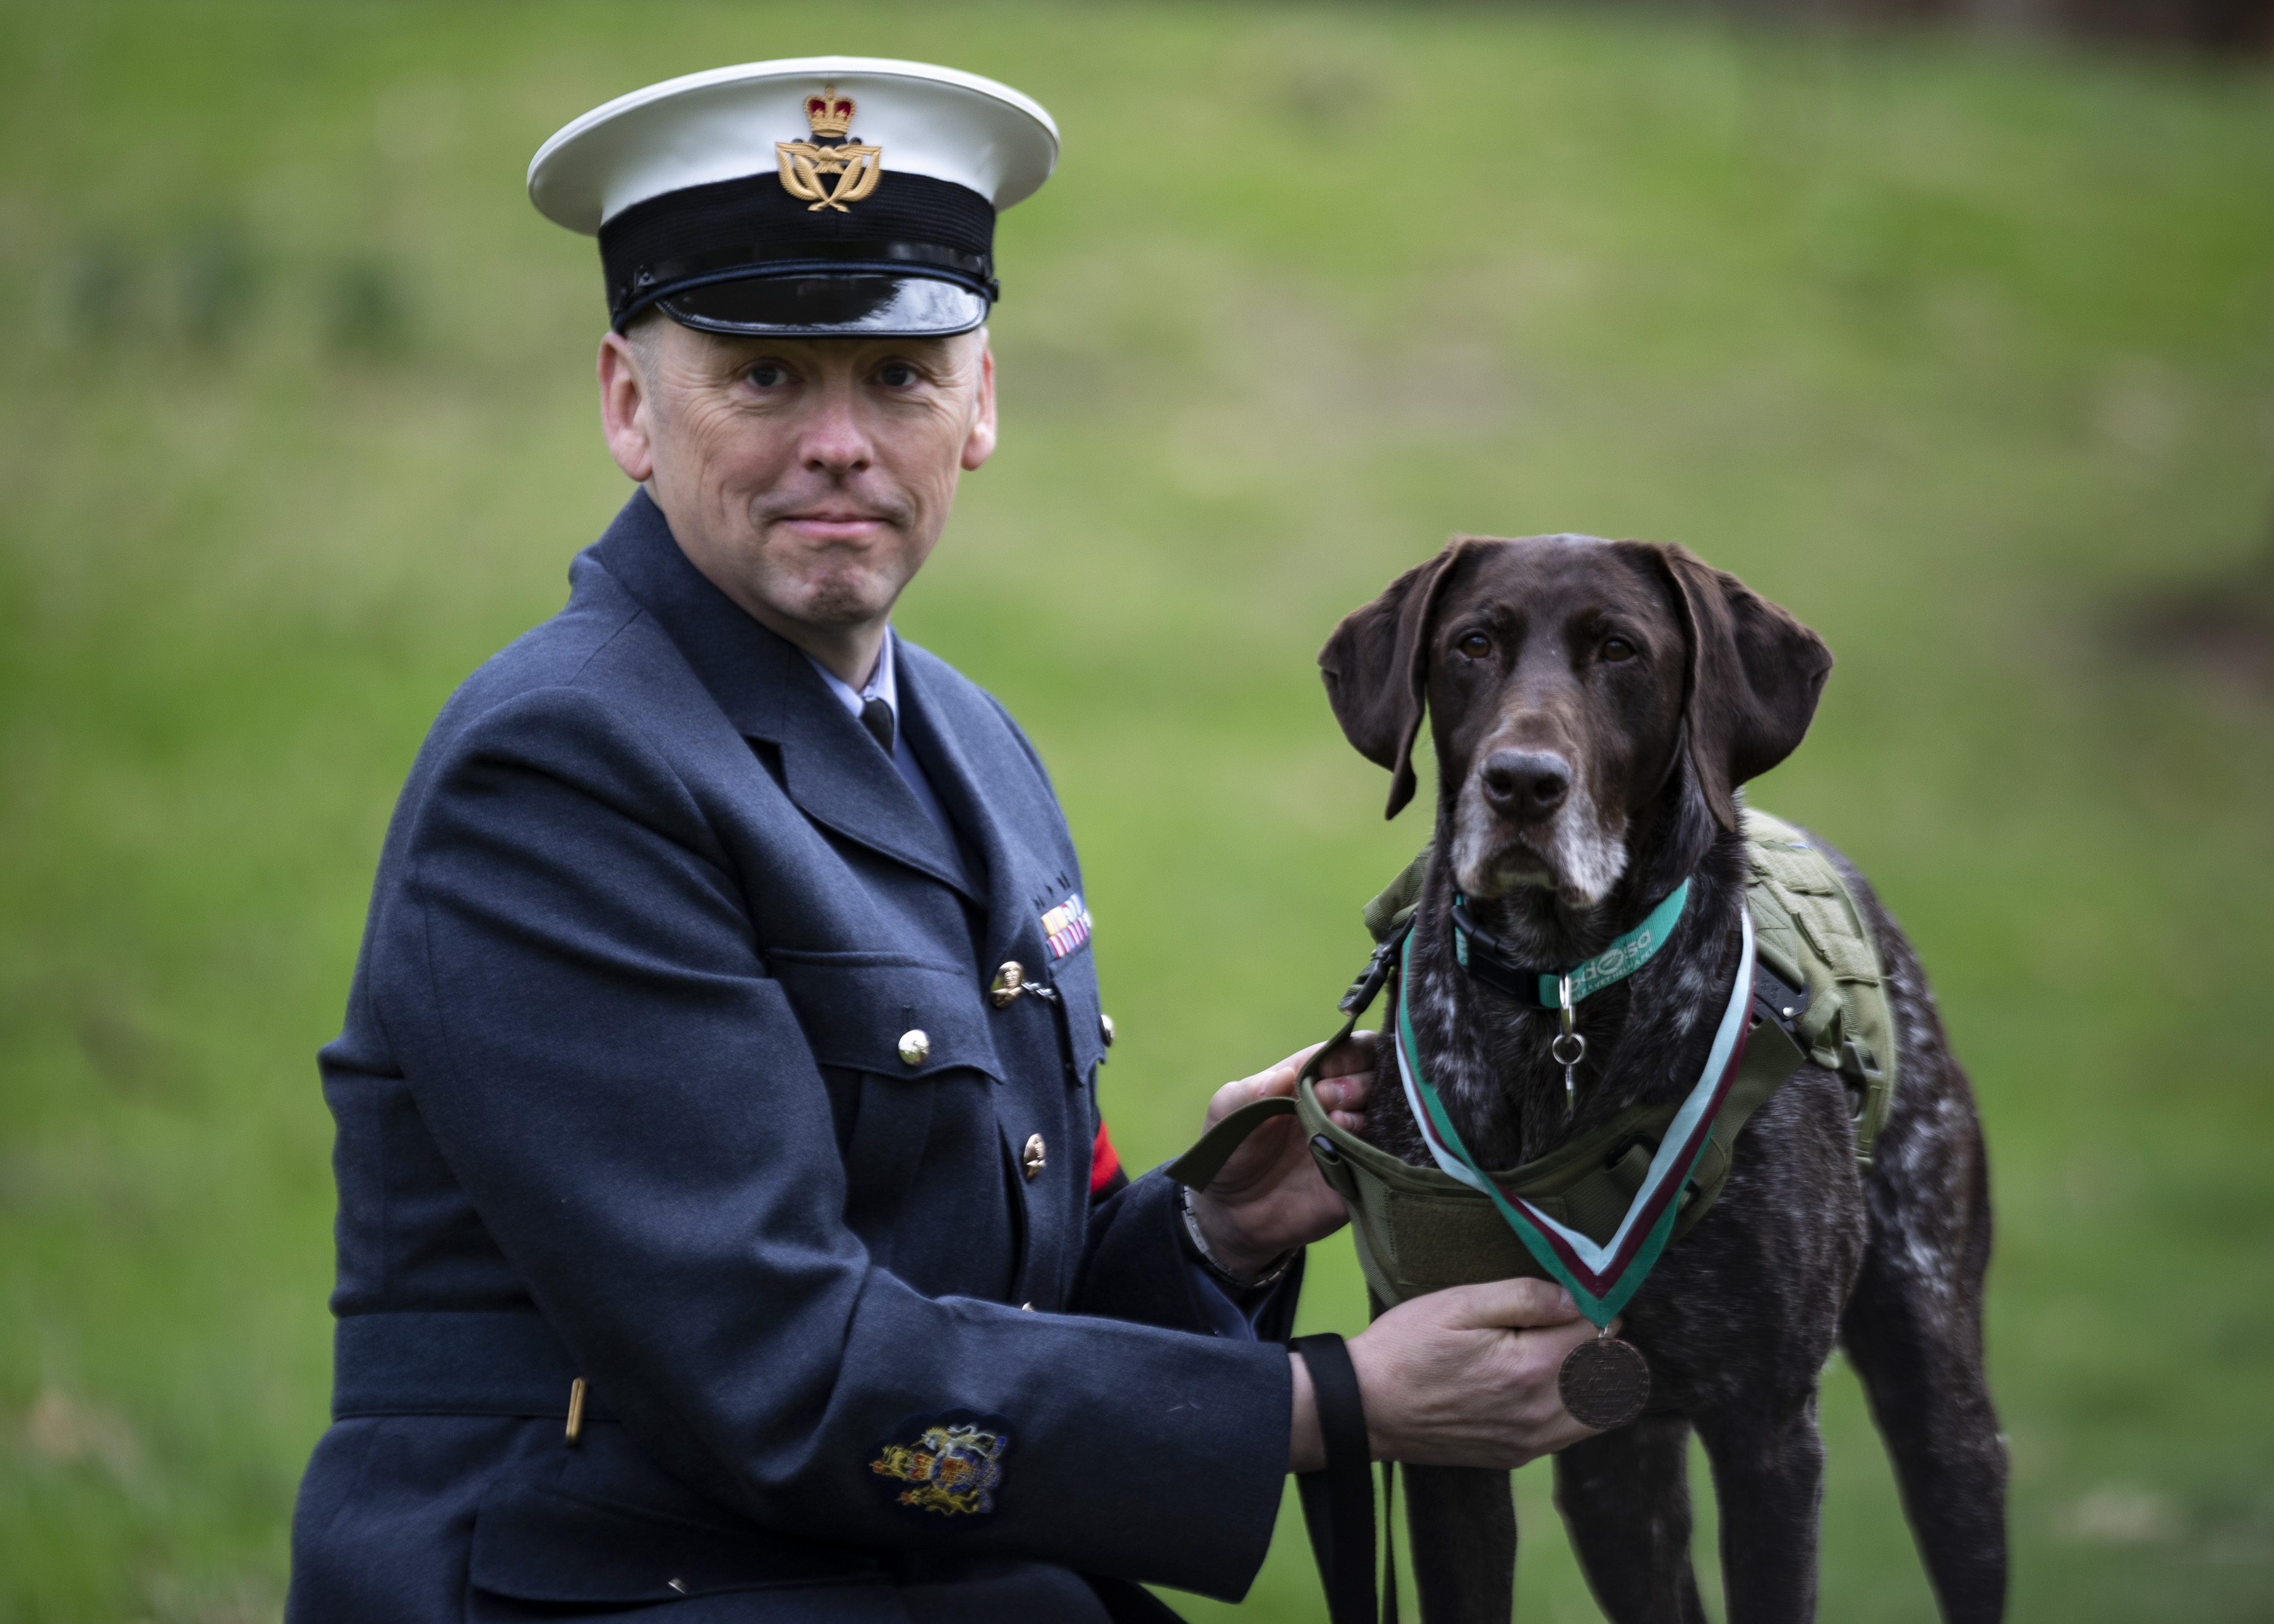 Personnel kneels with dog wearing medal.